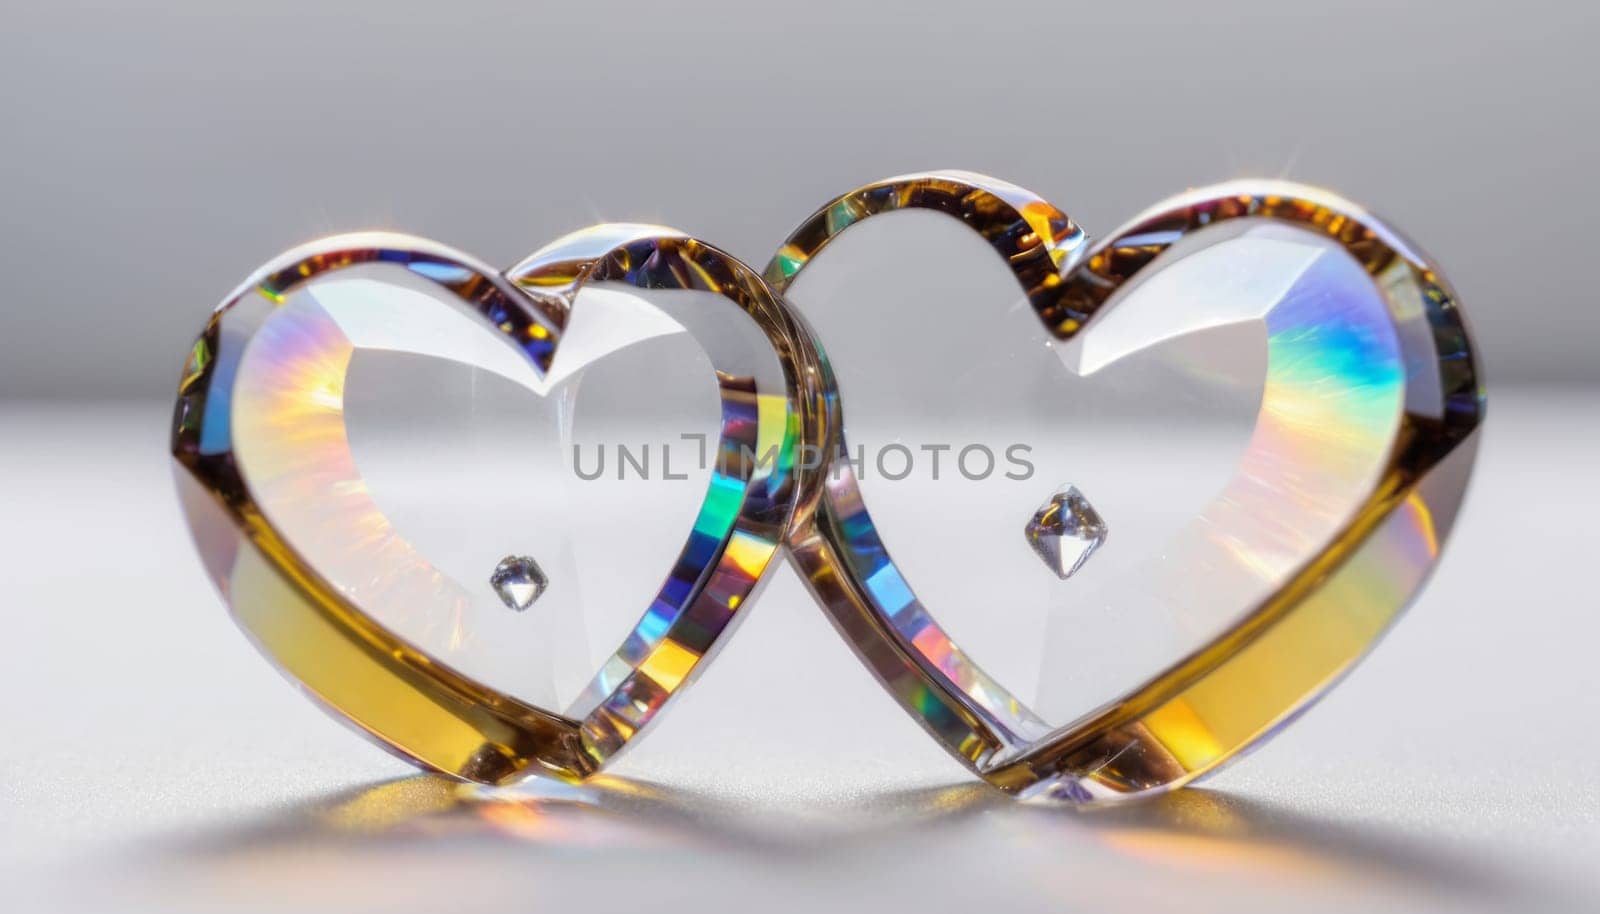 Two Yellow Hearts with Lens Flare by nkotlyar